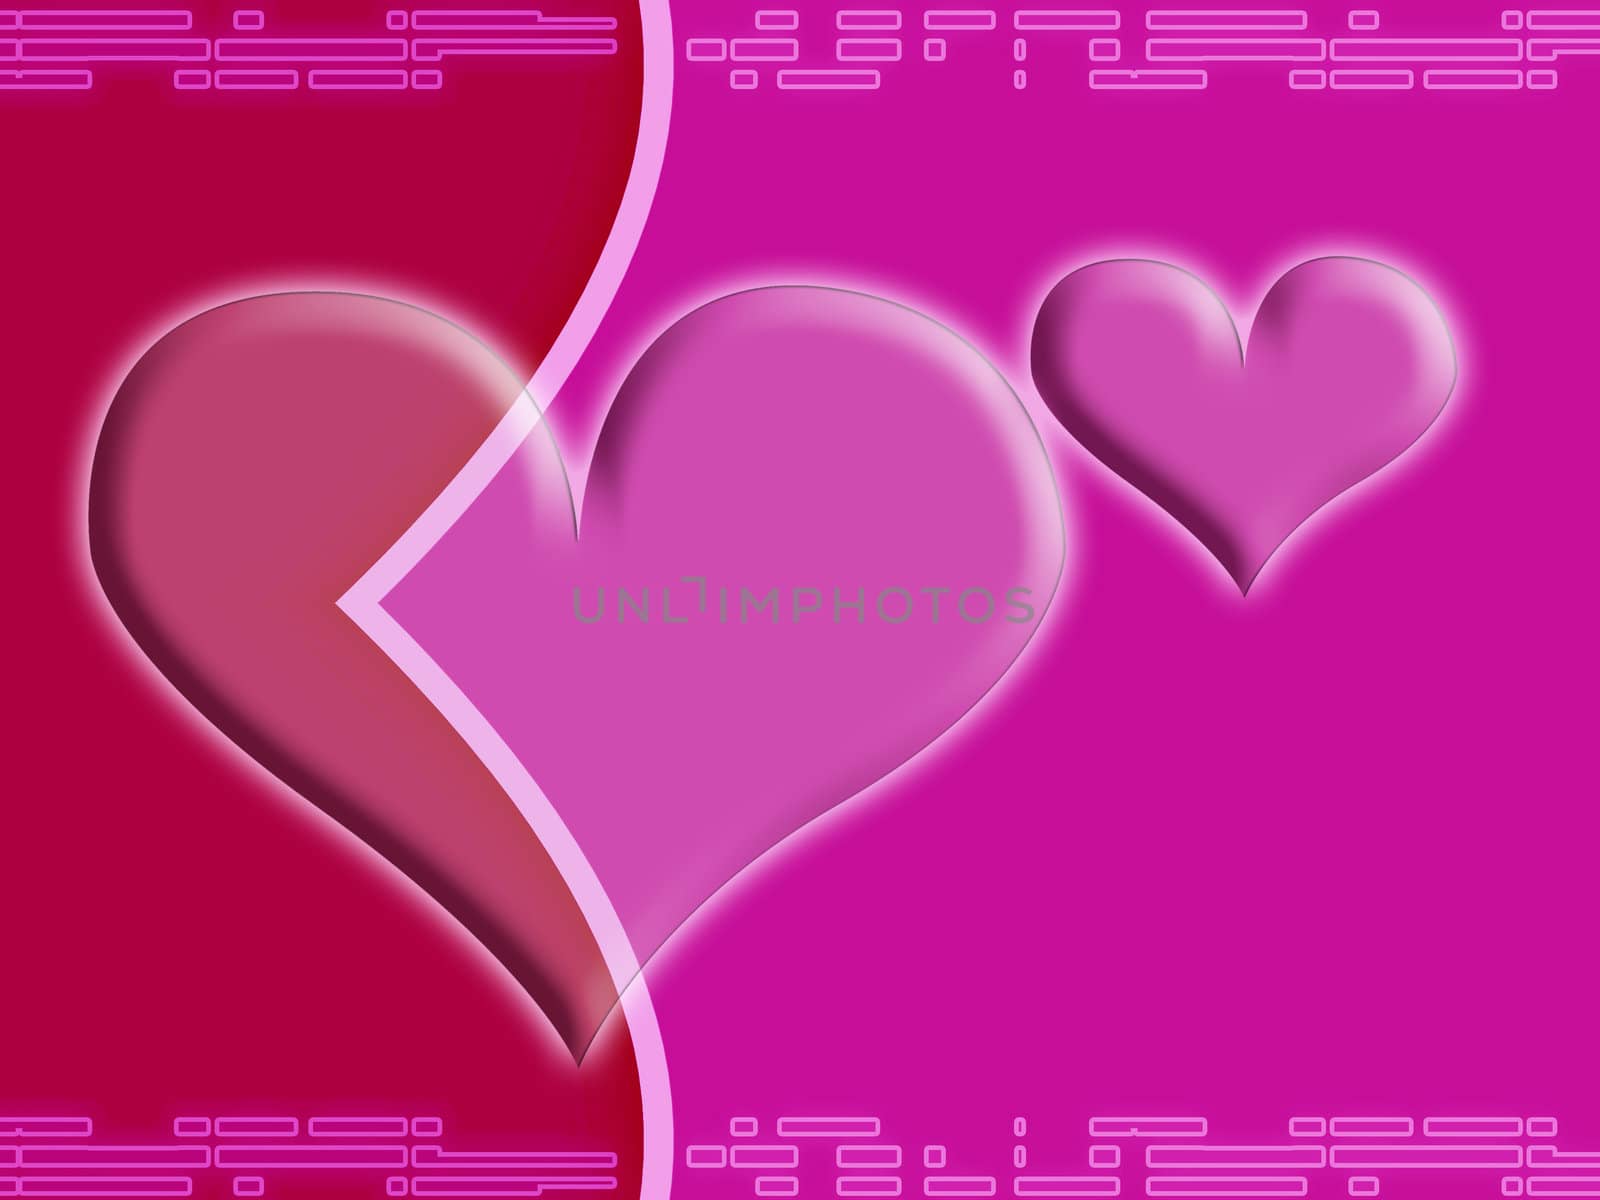 Computer designed abstract background - Valentine's day card with two harts